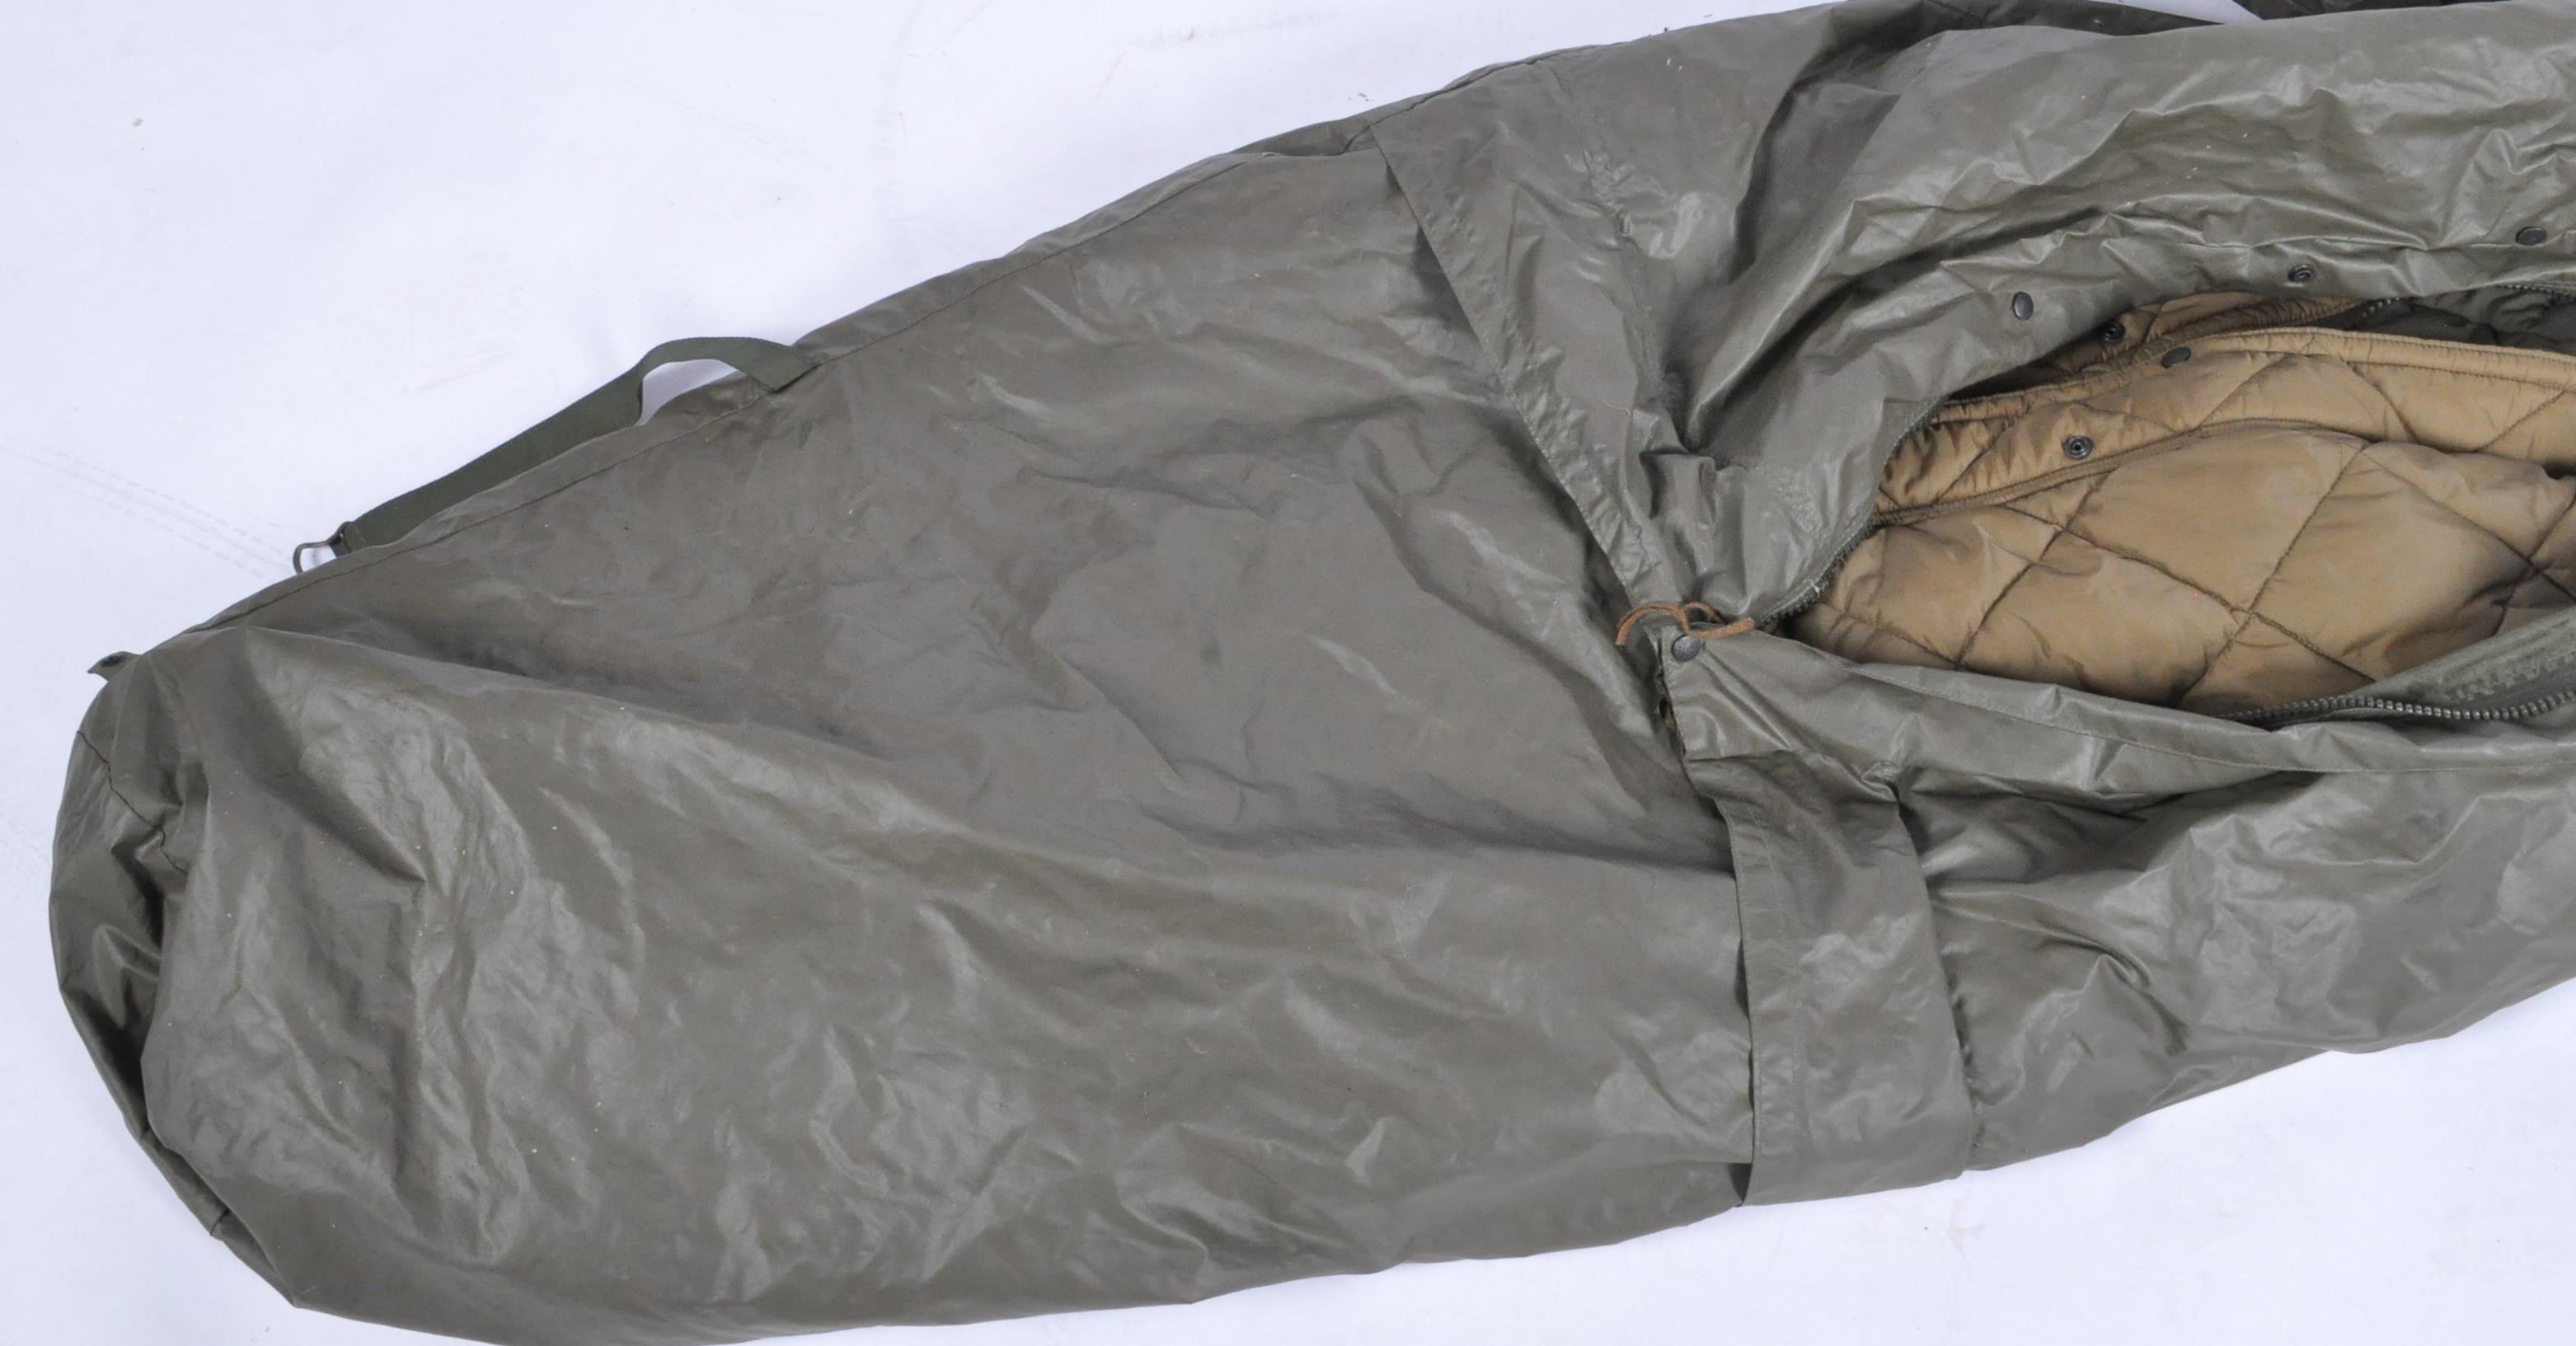 20TH CENTURY GERMAN SPECIAL FORCES / SNIPER'S LAY UP BAG - Image 2 of 6